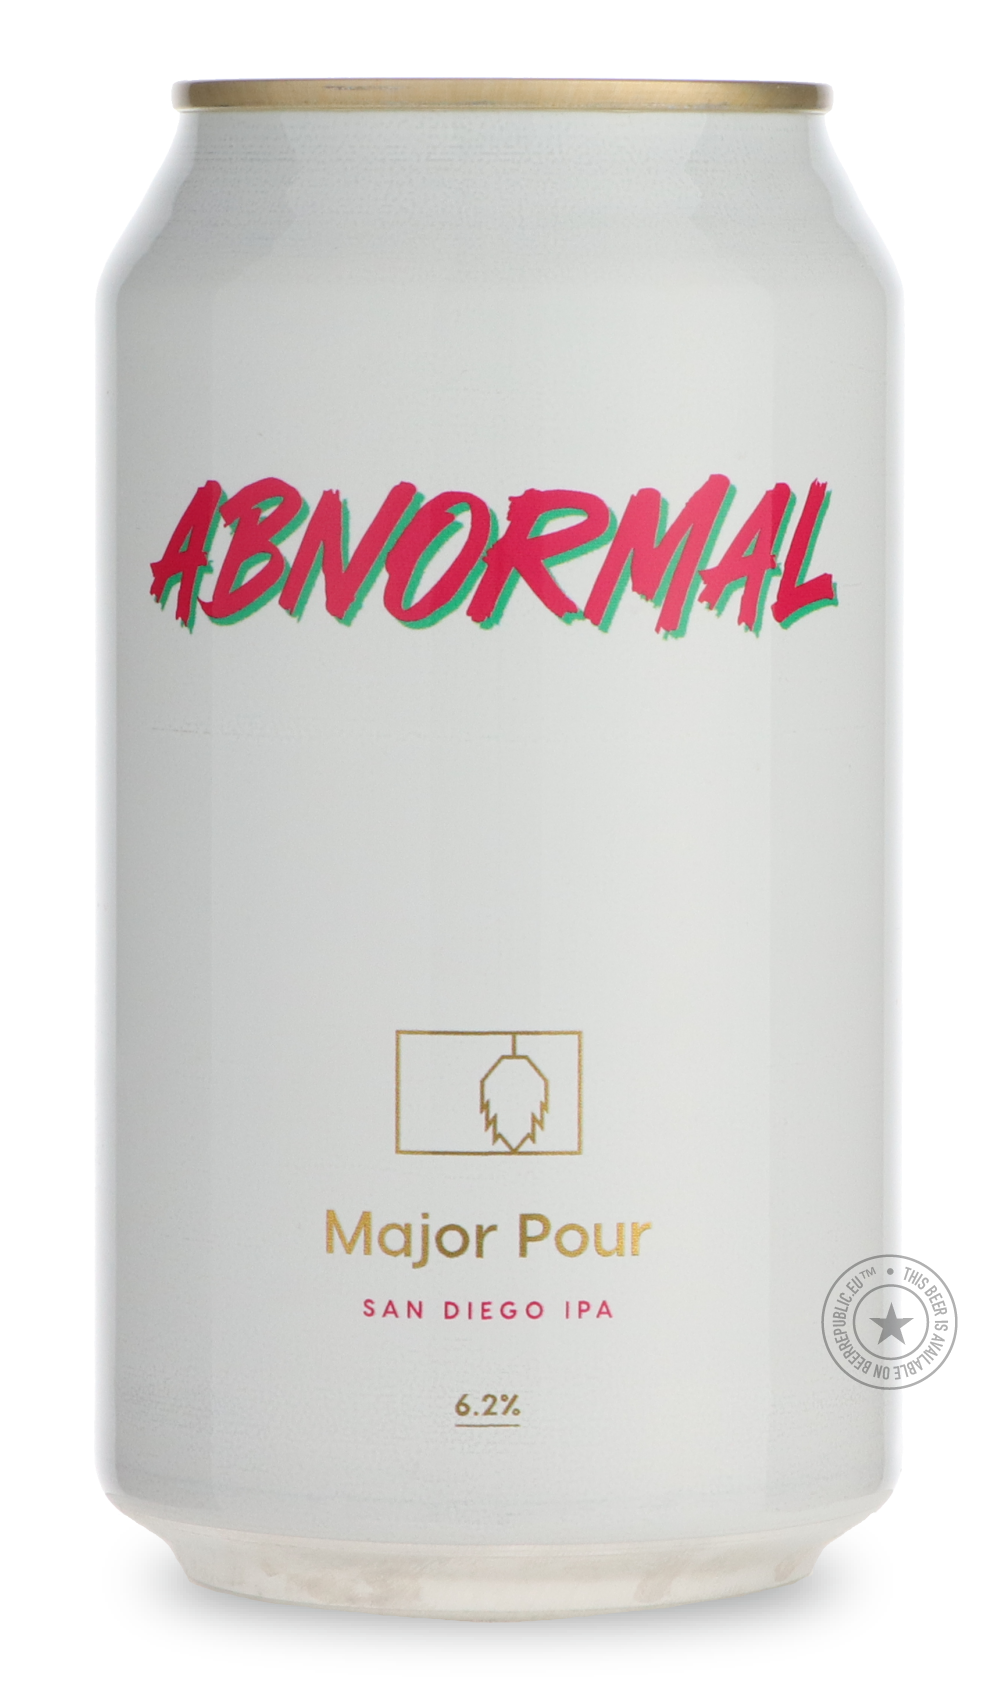 -Abnormal- Major Pour-IPA- Only @ Beer Republic - The best online beer store for American & Canadian craft beer - Buy beer online from the USA and Canada - Bier online kopen - Amerikaans bier kopen - Craft beer store - Craft beer kopen - Amerikanisch bier kaufen - Bier online kaufen - Acheter biere online - IPA - Stout - Porter - New England IPA - Hazy IPA - Imperial Stout - Barrel Aged - Barrel Aged Imperial Stout - Brown - Dark beer - Blond - Blonde - Pilsner - Lager - Wheat - Weizen - Amber - Barley Wine